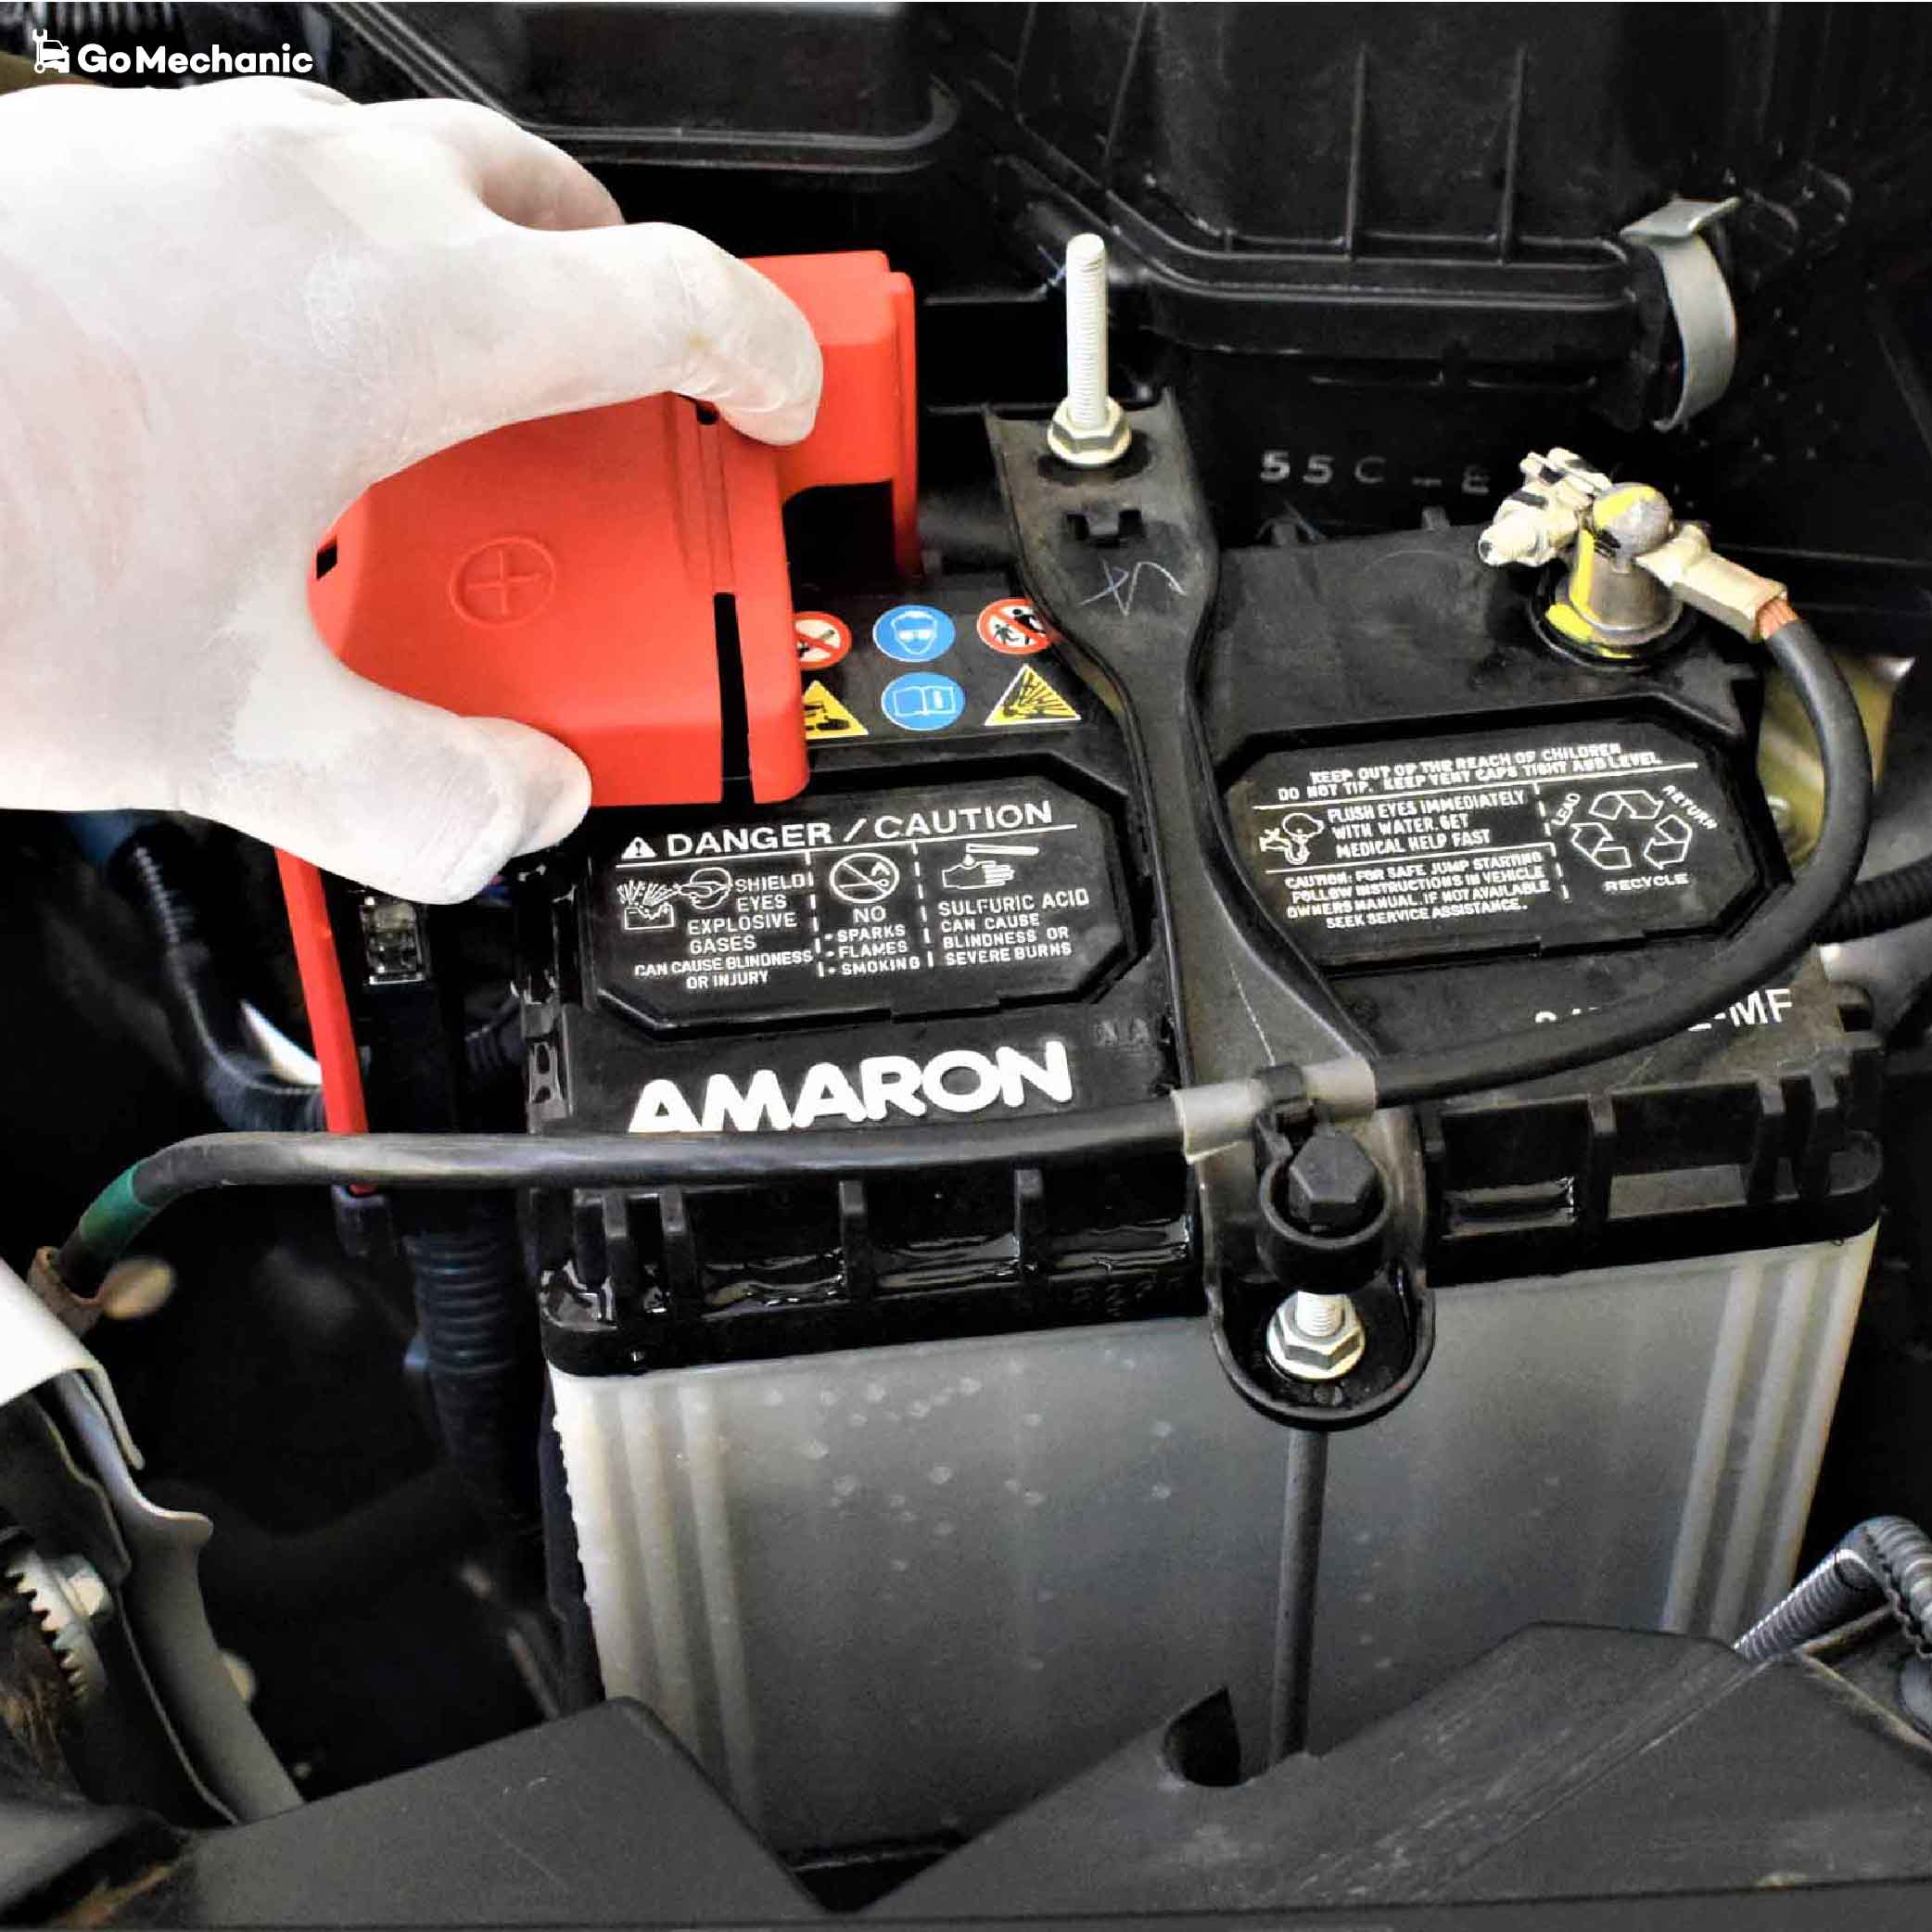 Easy Hacks To Increase Your Car's Battery Life